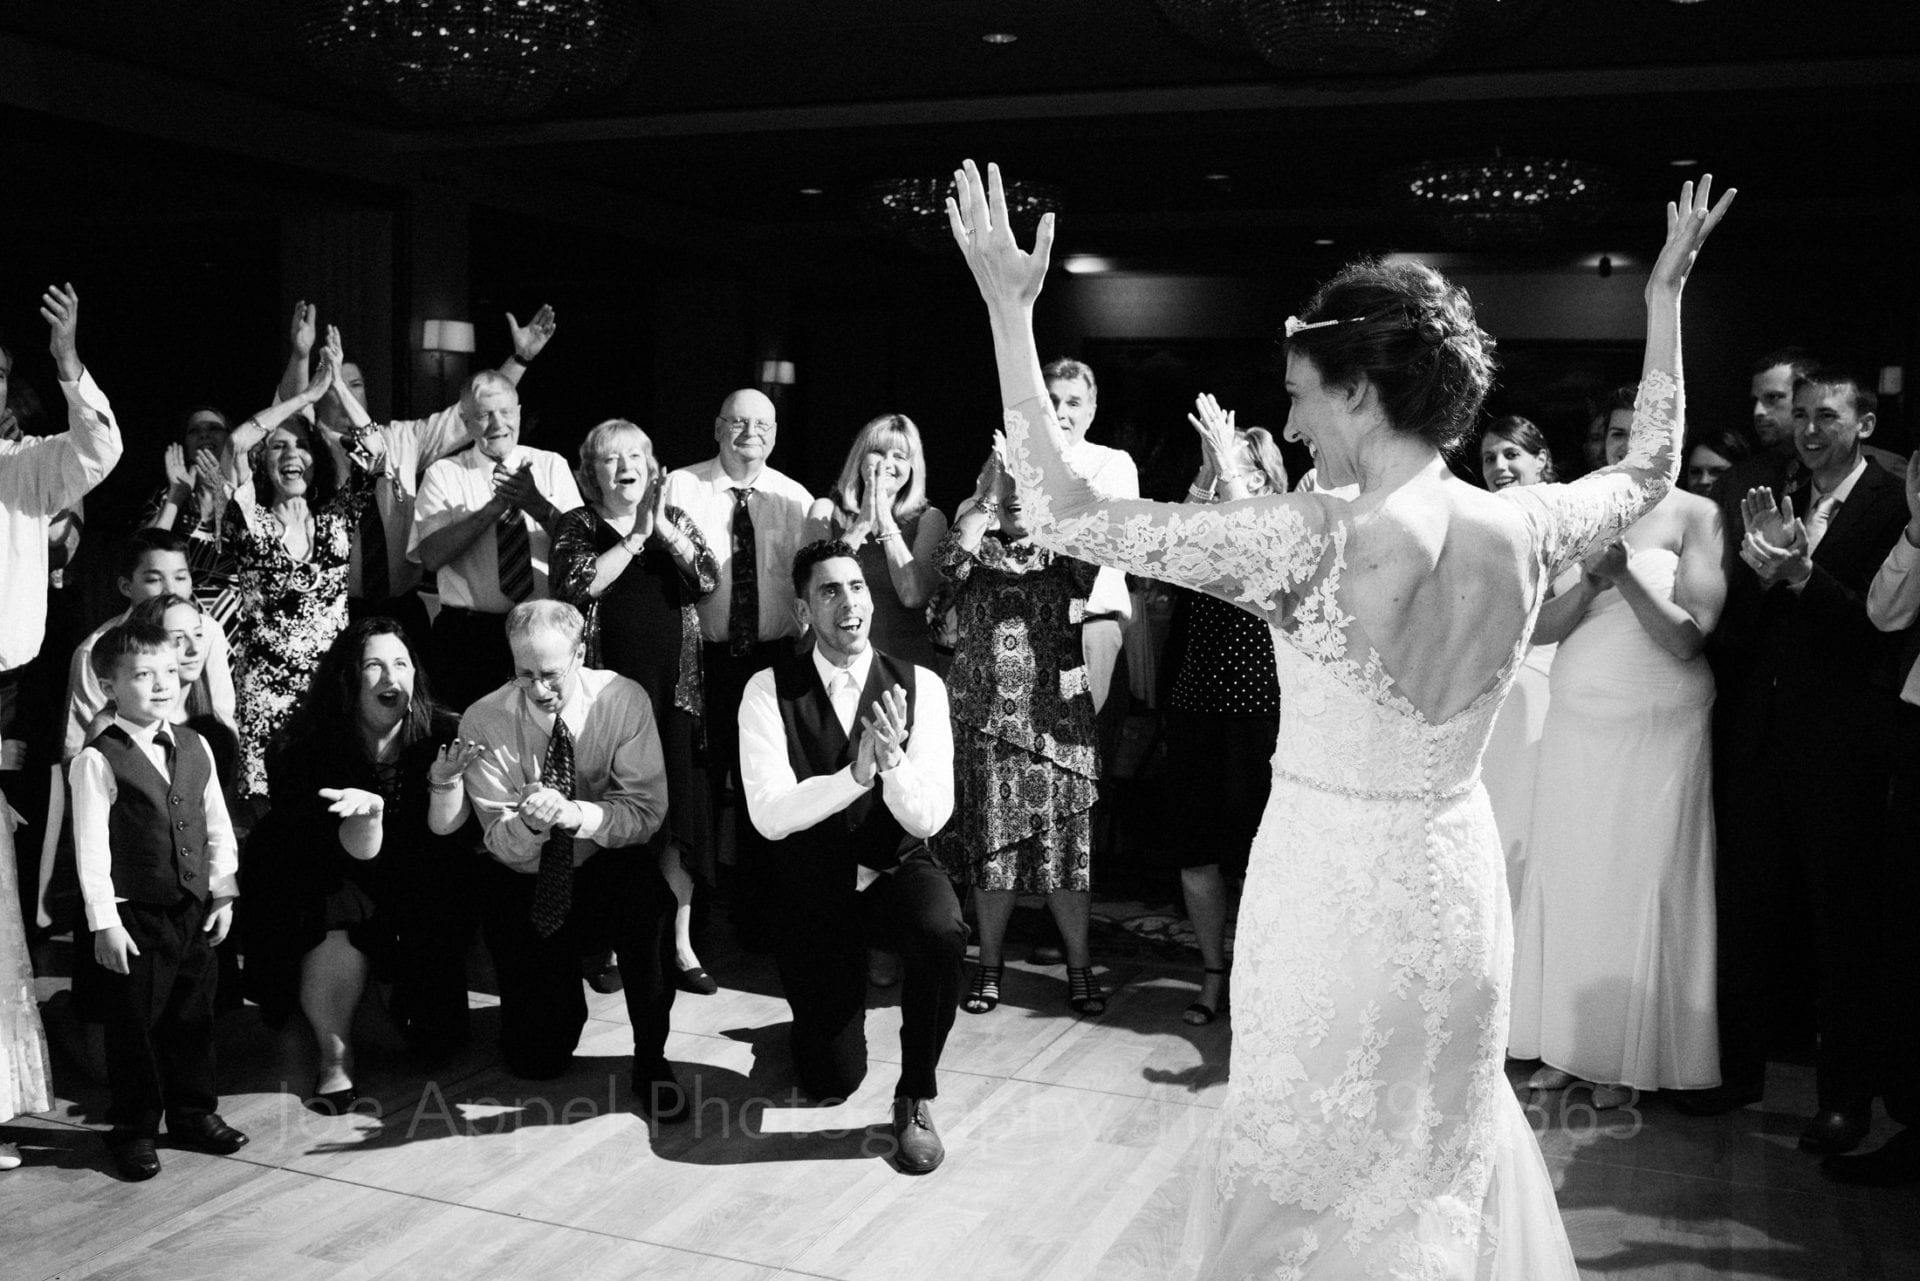 Bride holds her hands up in joy as she is surrounded and serenaded by her family and friends.